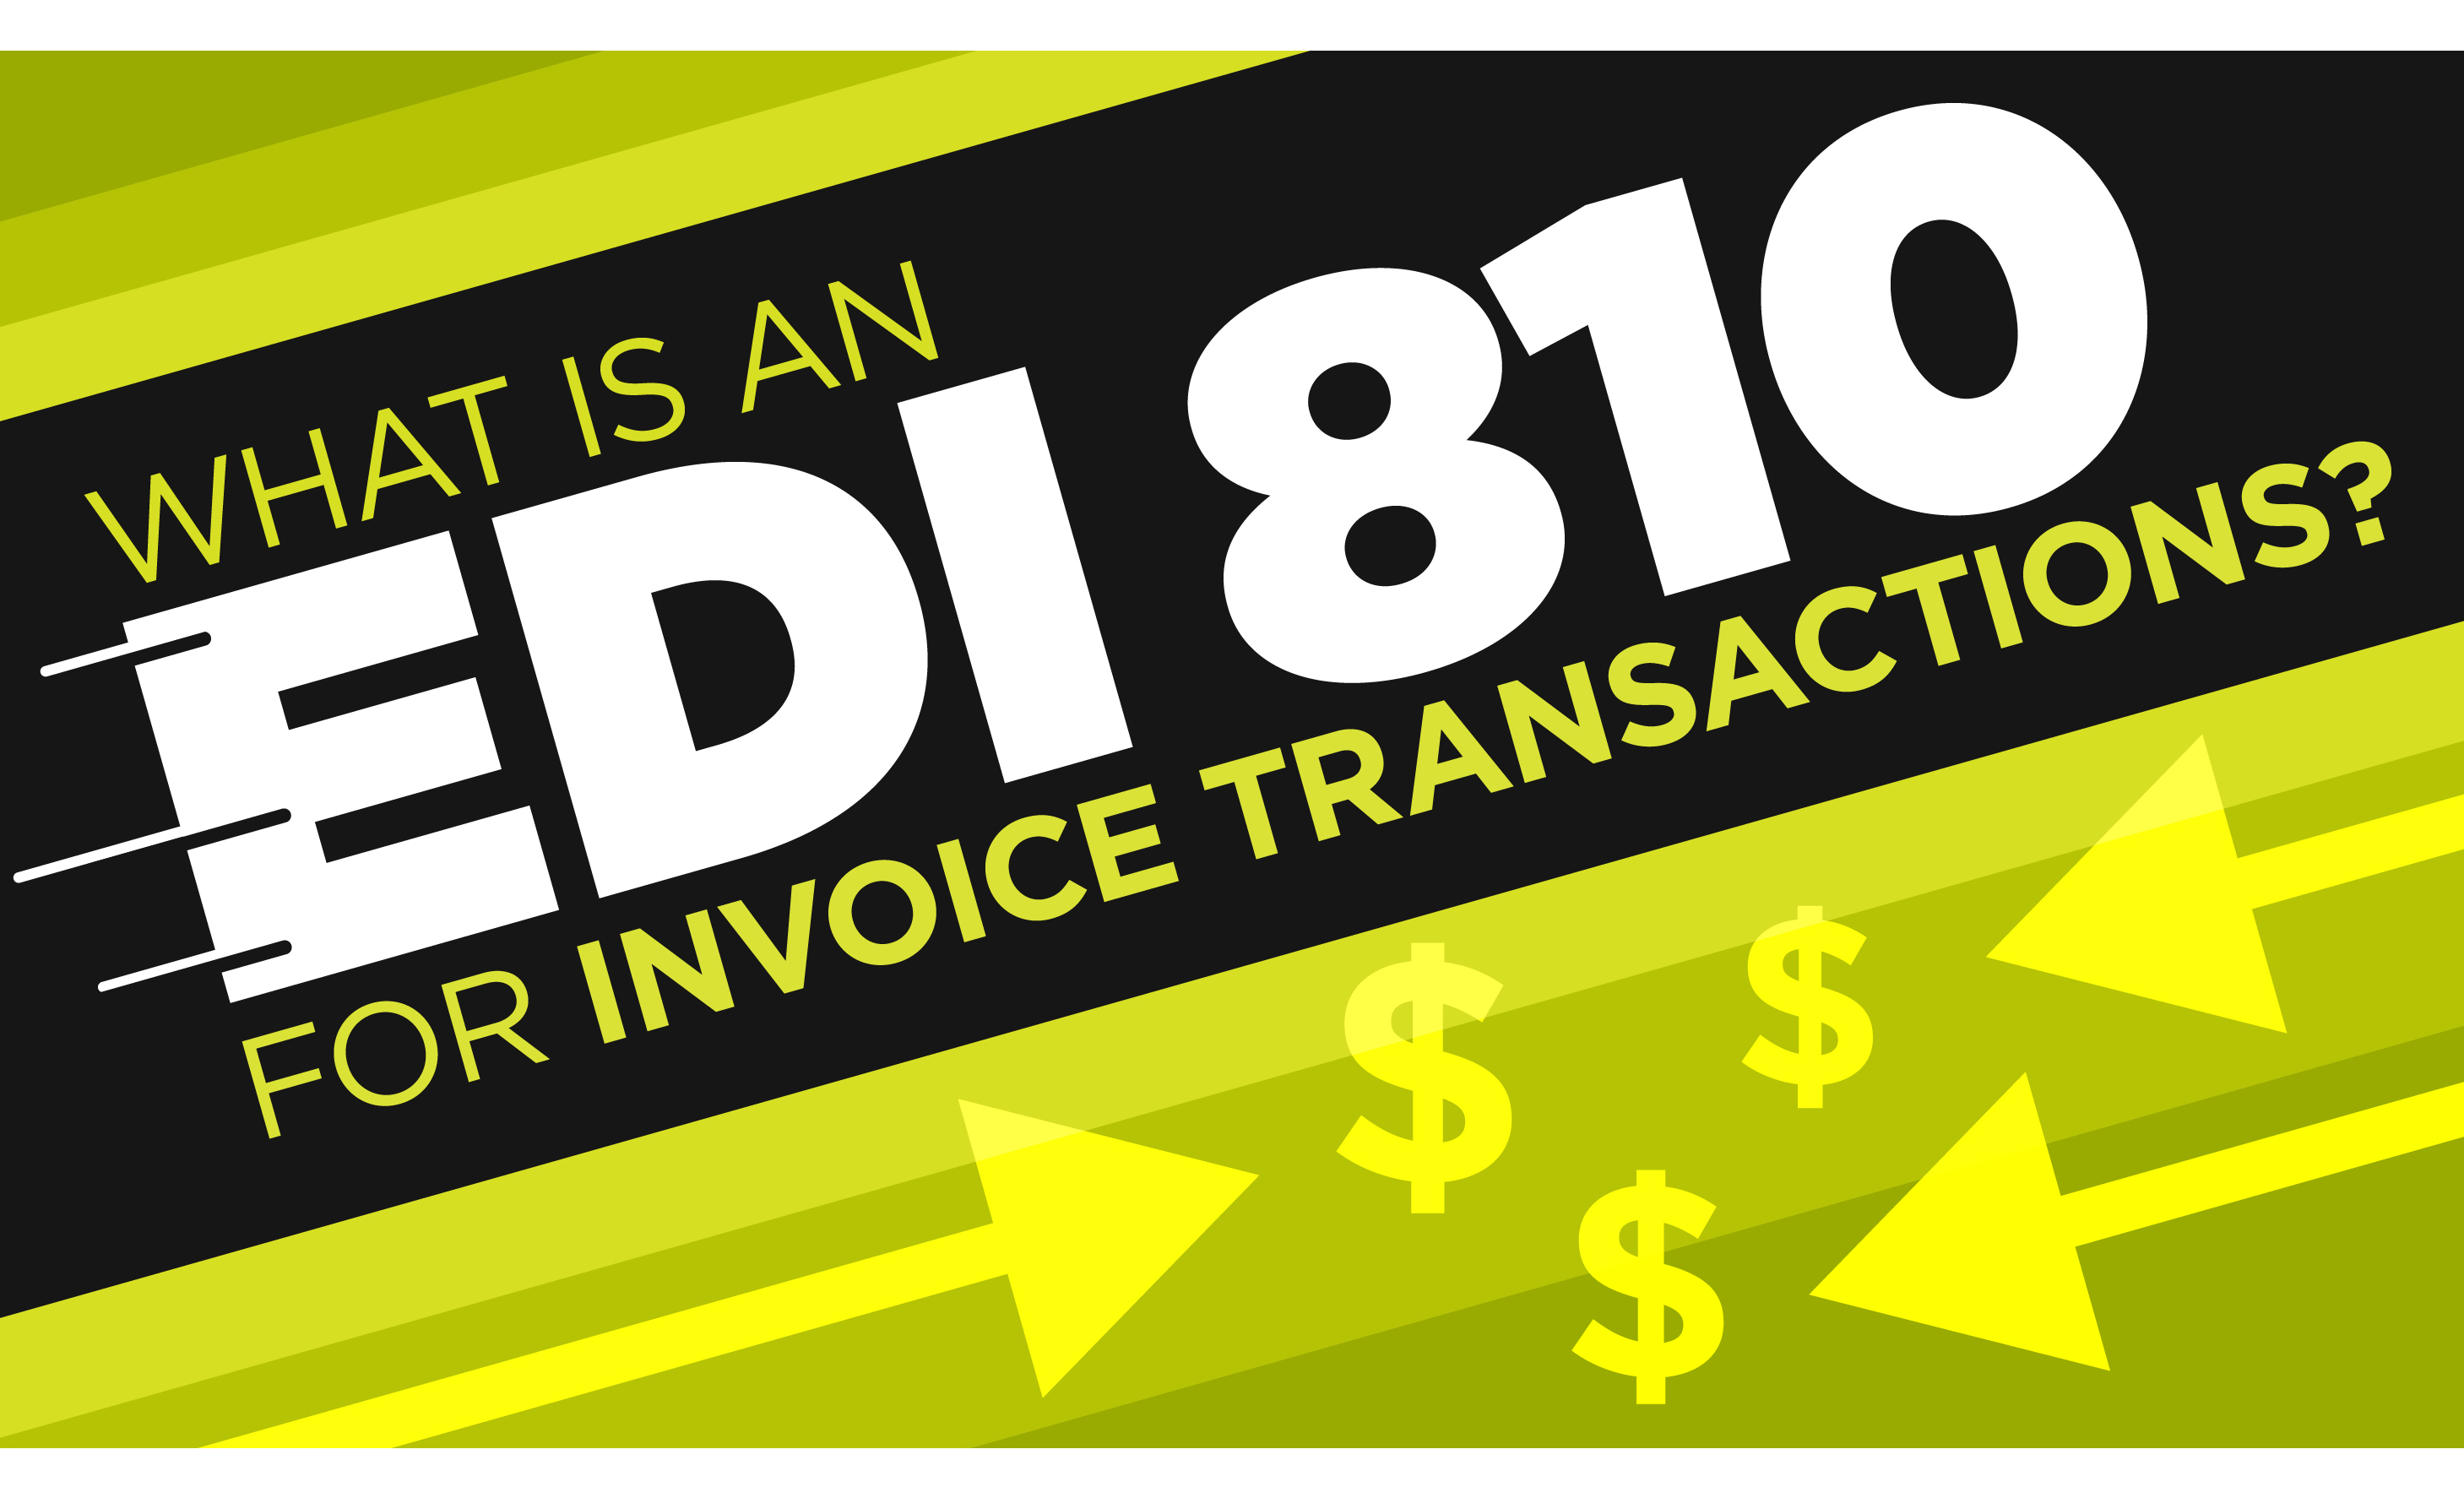 What is an EDI 810 for Invoice Transactions?